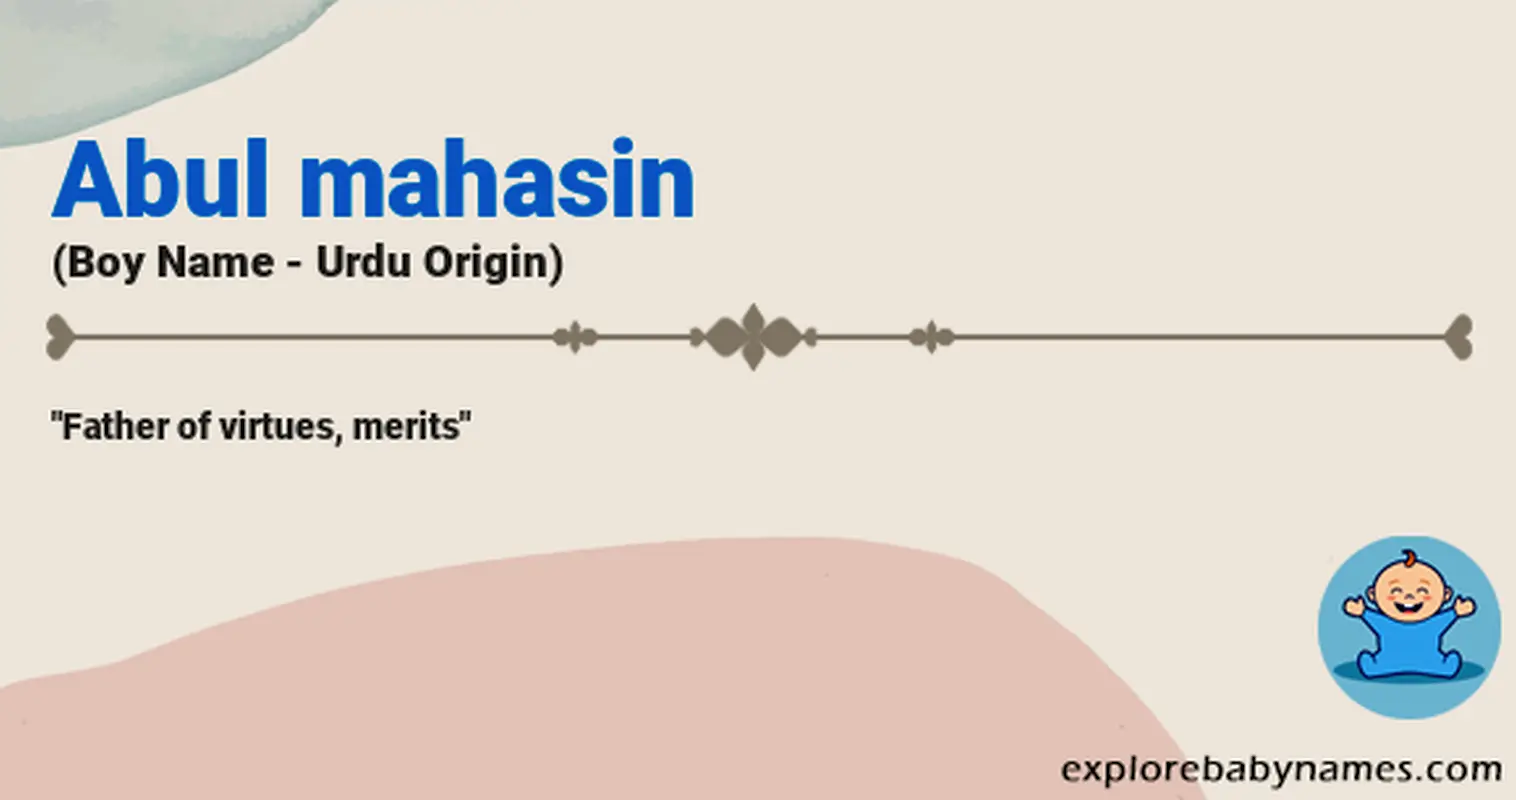 Meaning of Abul mahasin